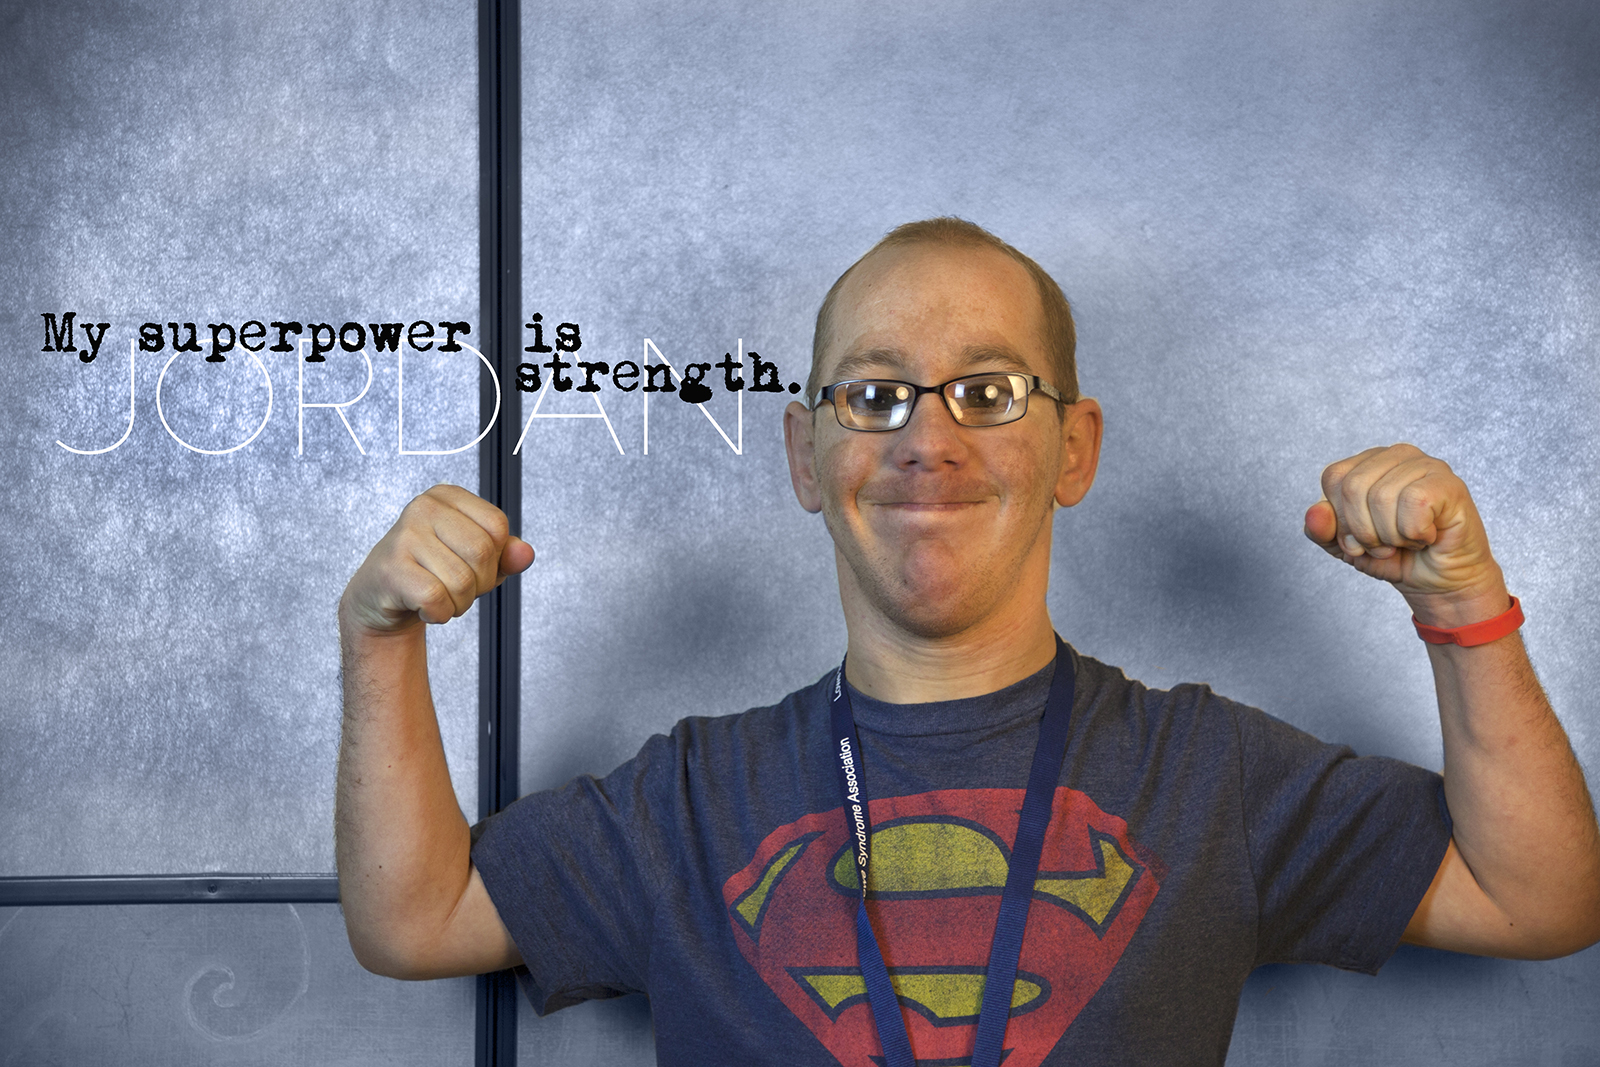 Young man with Lowe syndrome flexing showing his strength